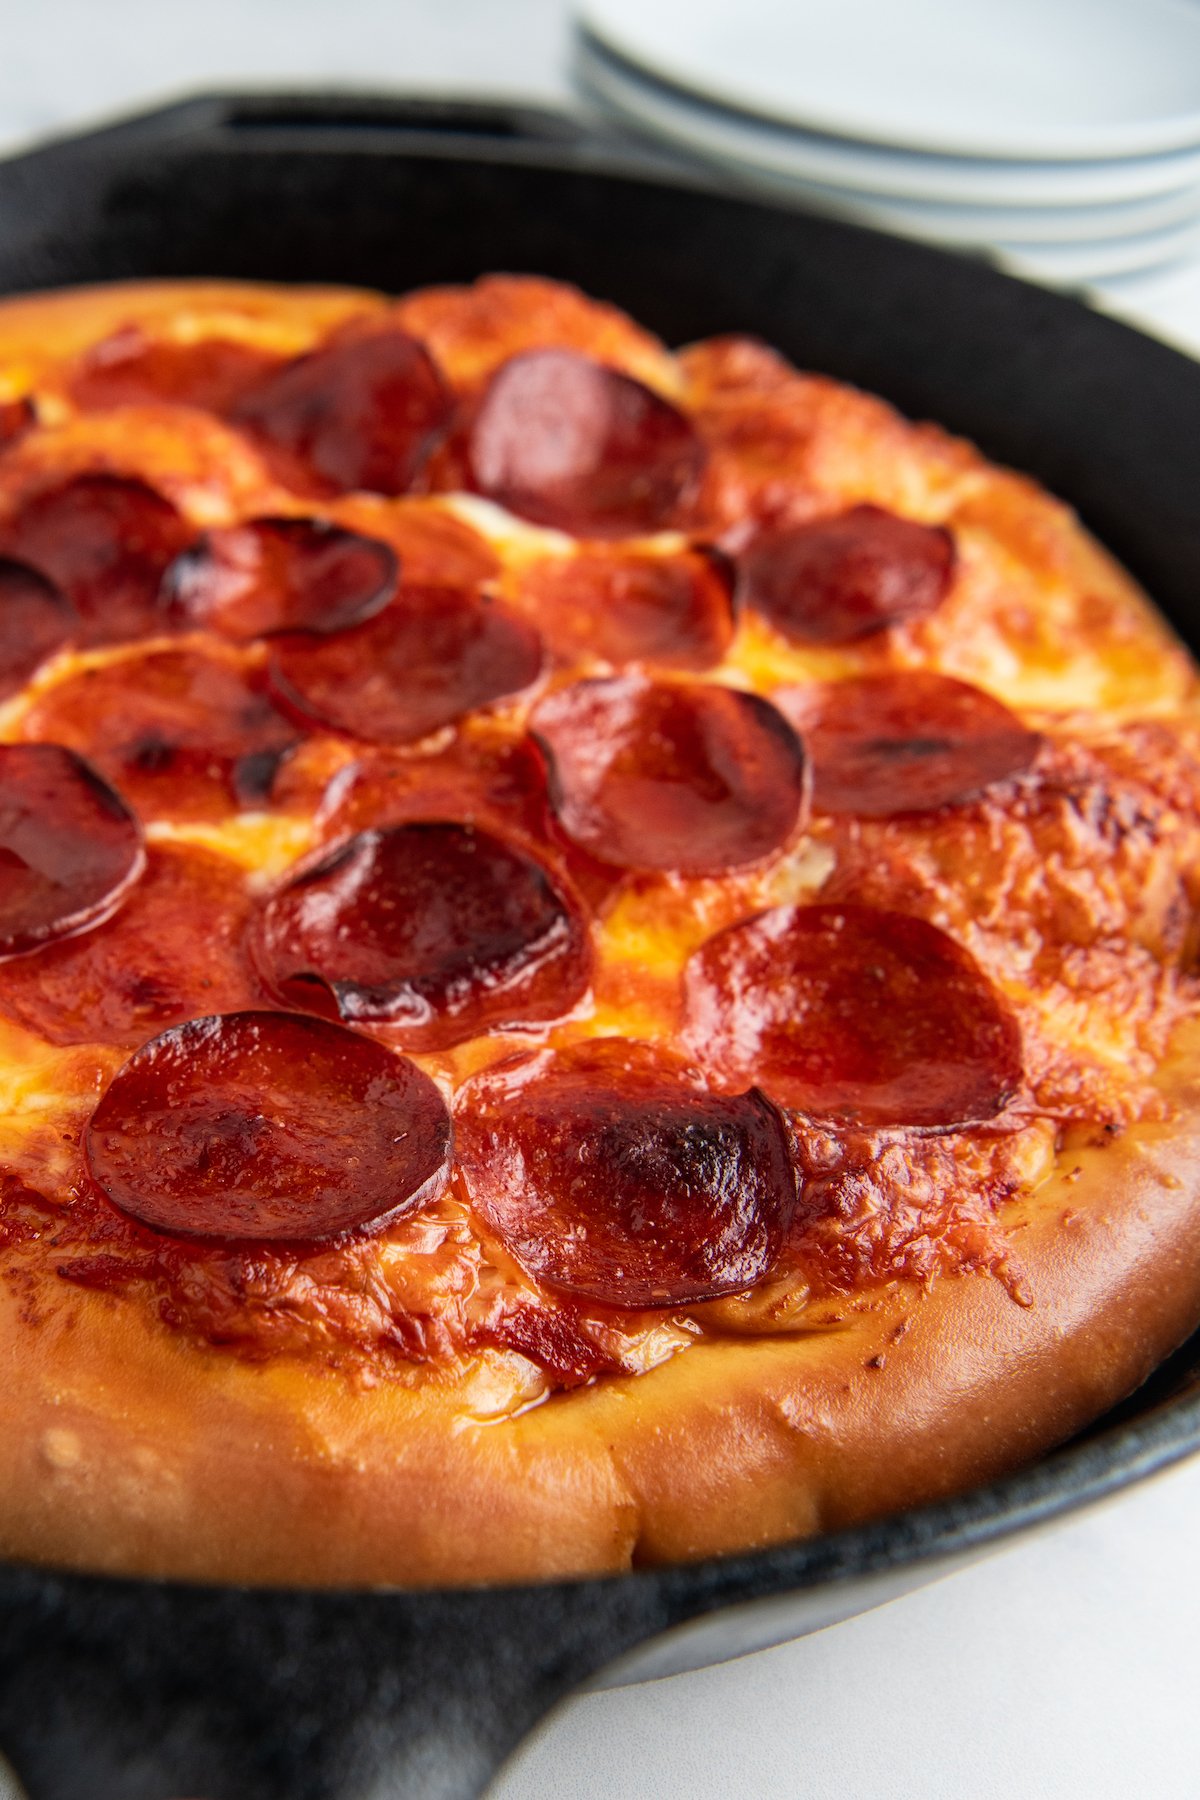 Pulled out view of a cast-iron pepperoni pizza